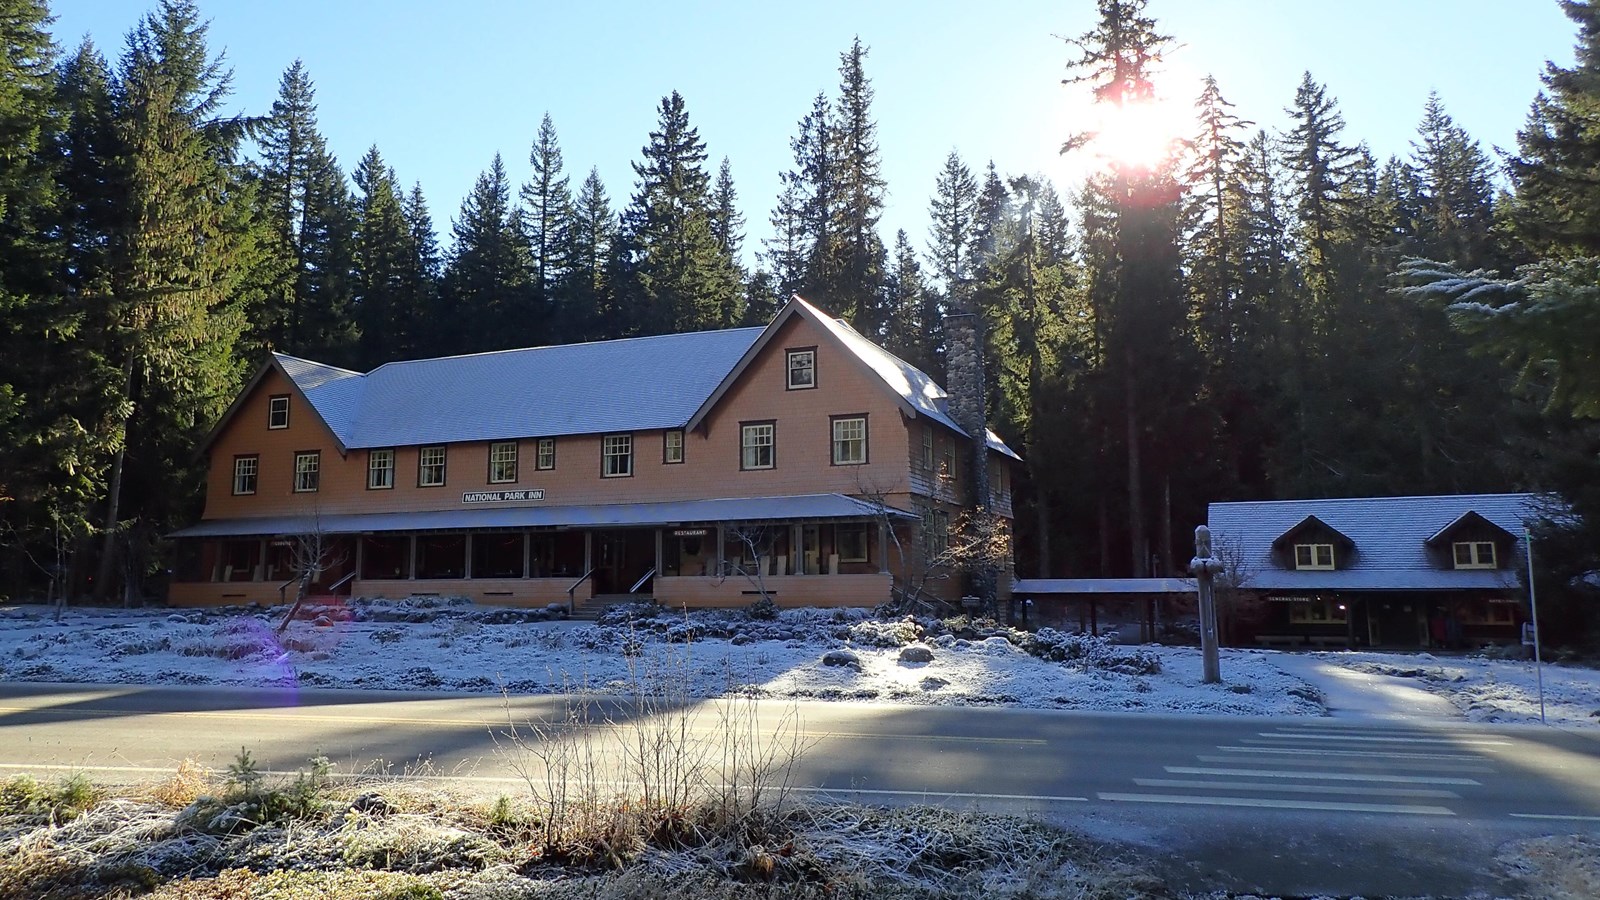 A two-story wood building with a small building next door, dusted by snow and surround by forest.